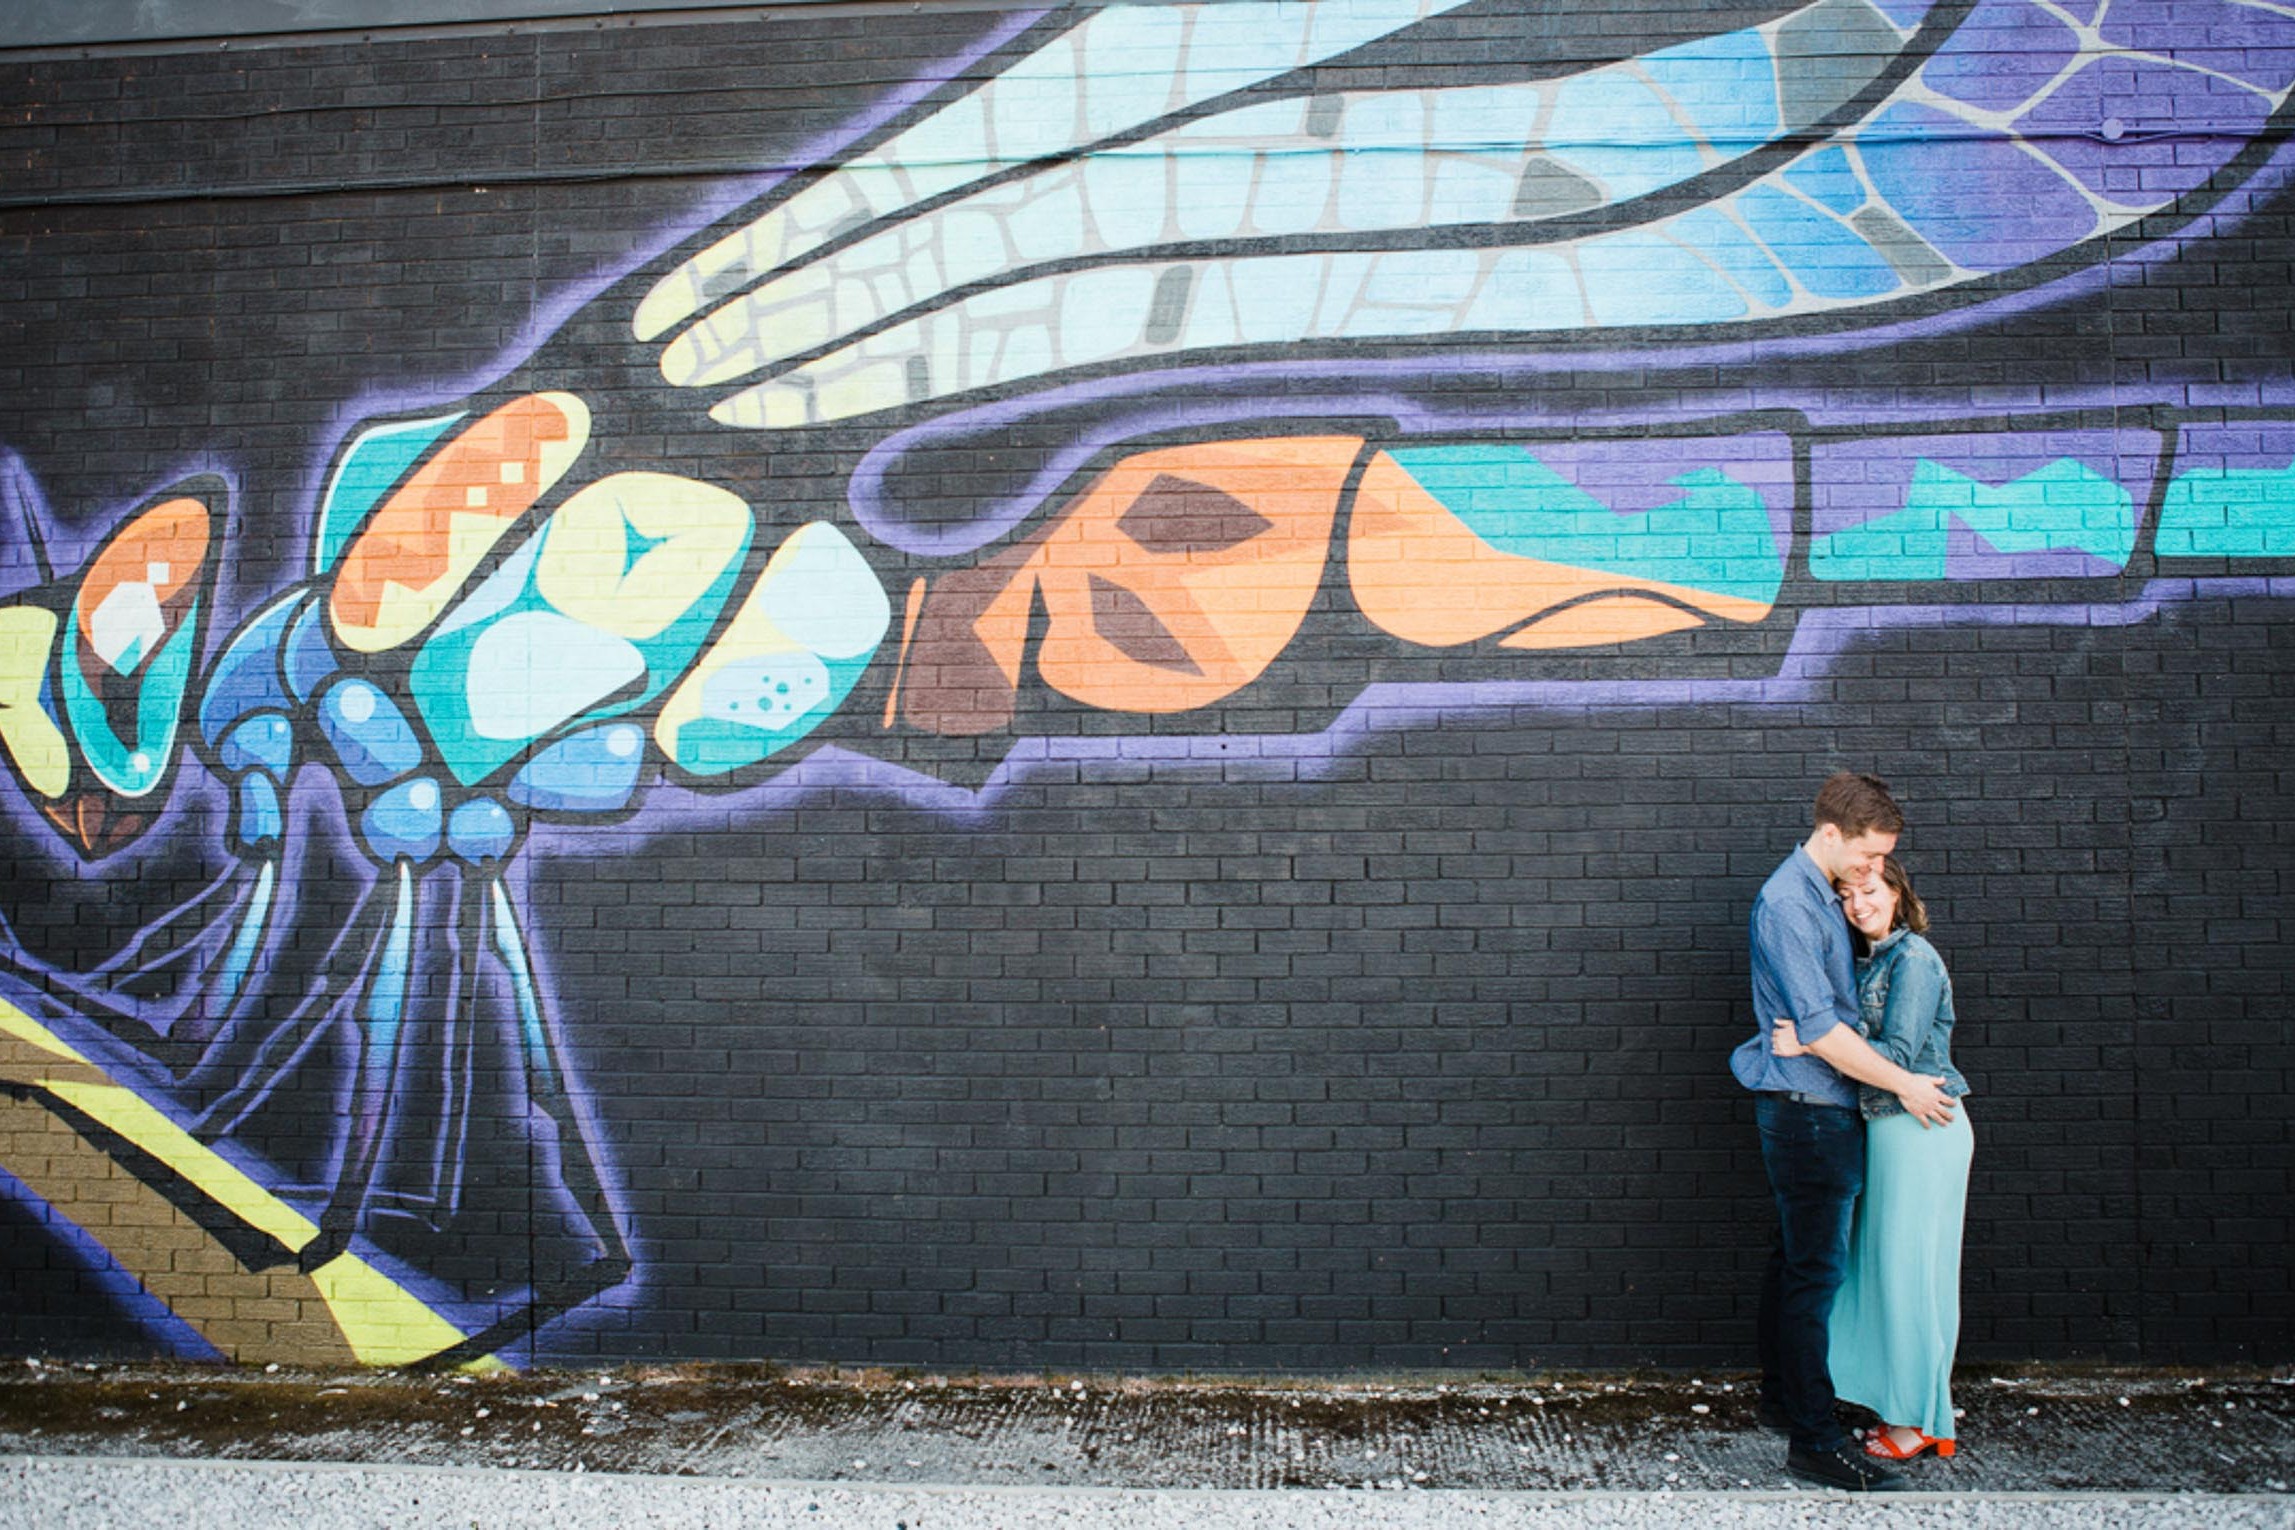 A young couple embrace white stood in front of a graffiti wall depicting a dragonfly